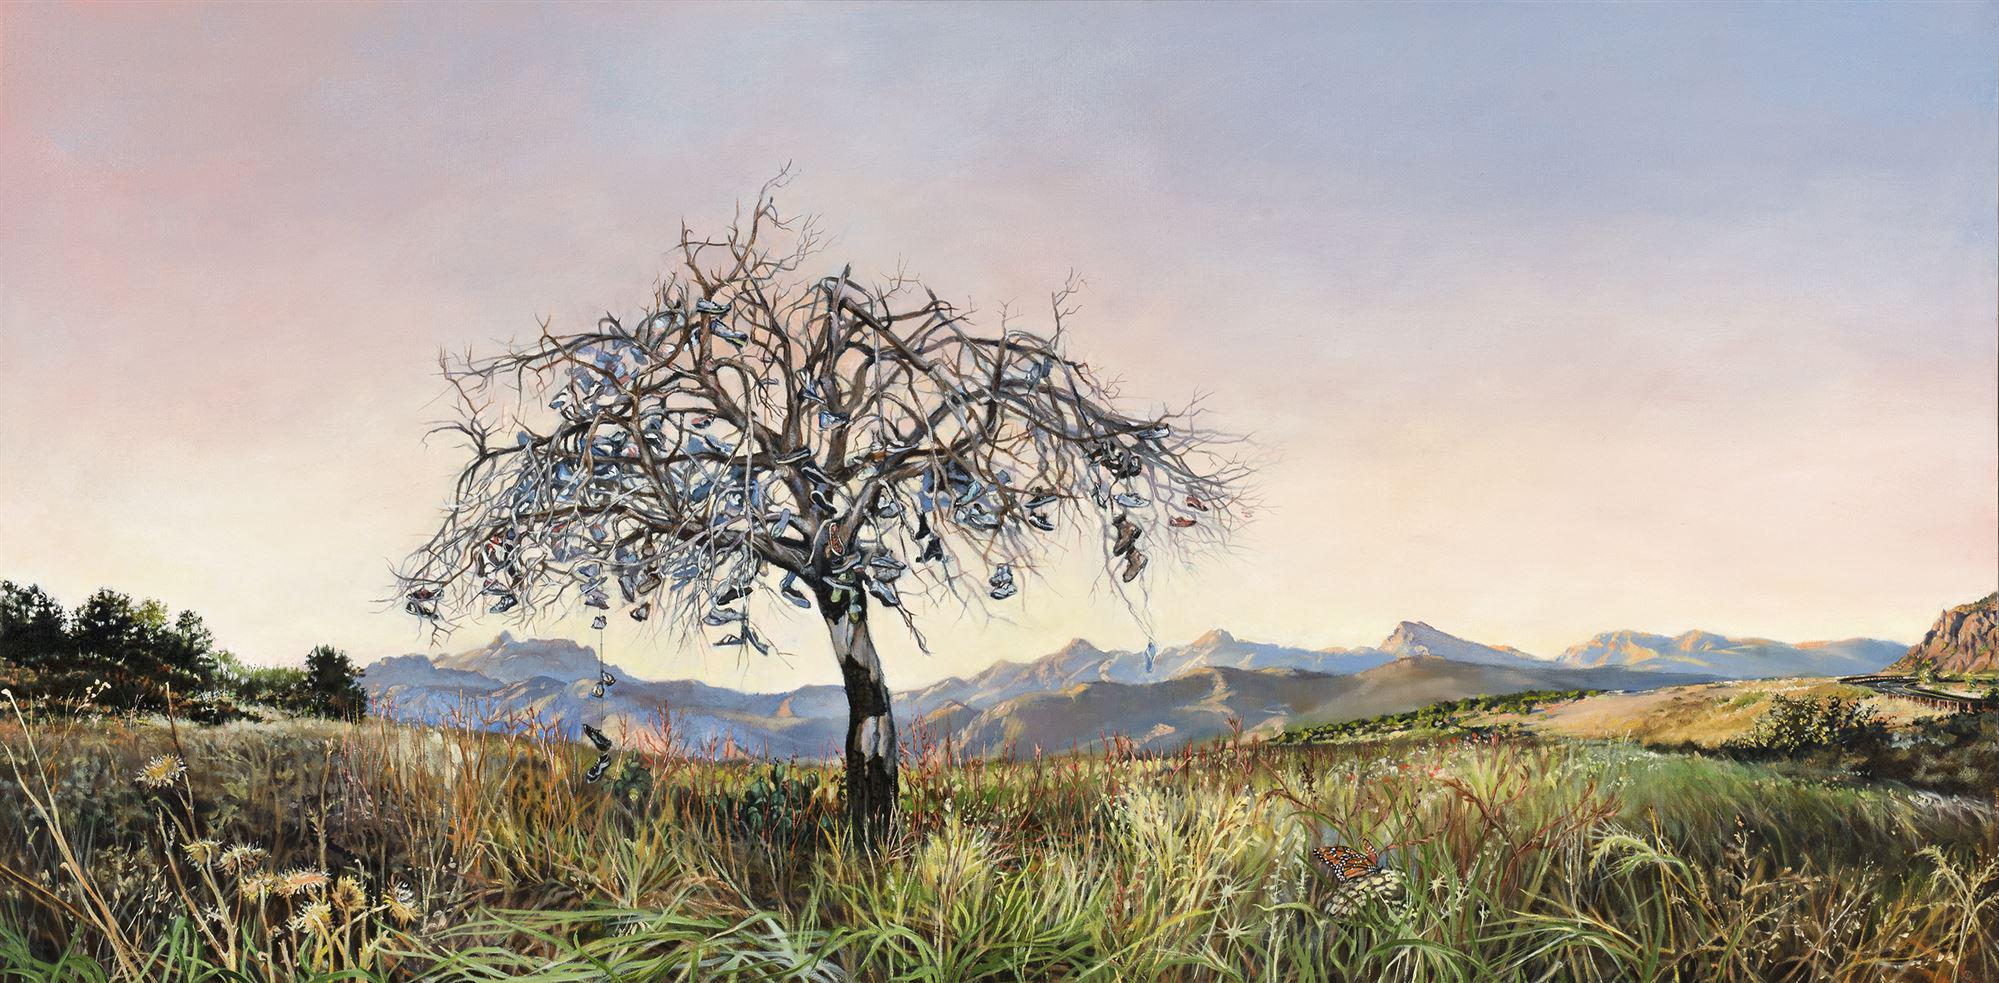 
		                					Don Stinson		                																	
																											<i>Tonto Basin Shoe-Tree: A Shift in Migratory Patterns,</i>  
																																								2016, 
																																								oil on linen, 
																																								38 x 46 x 2 inches 
																								
		                				